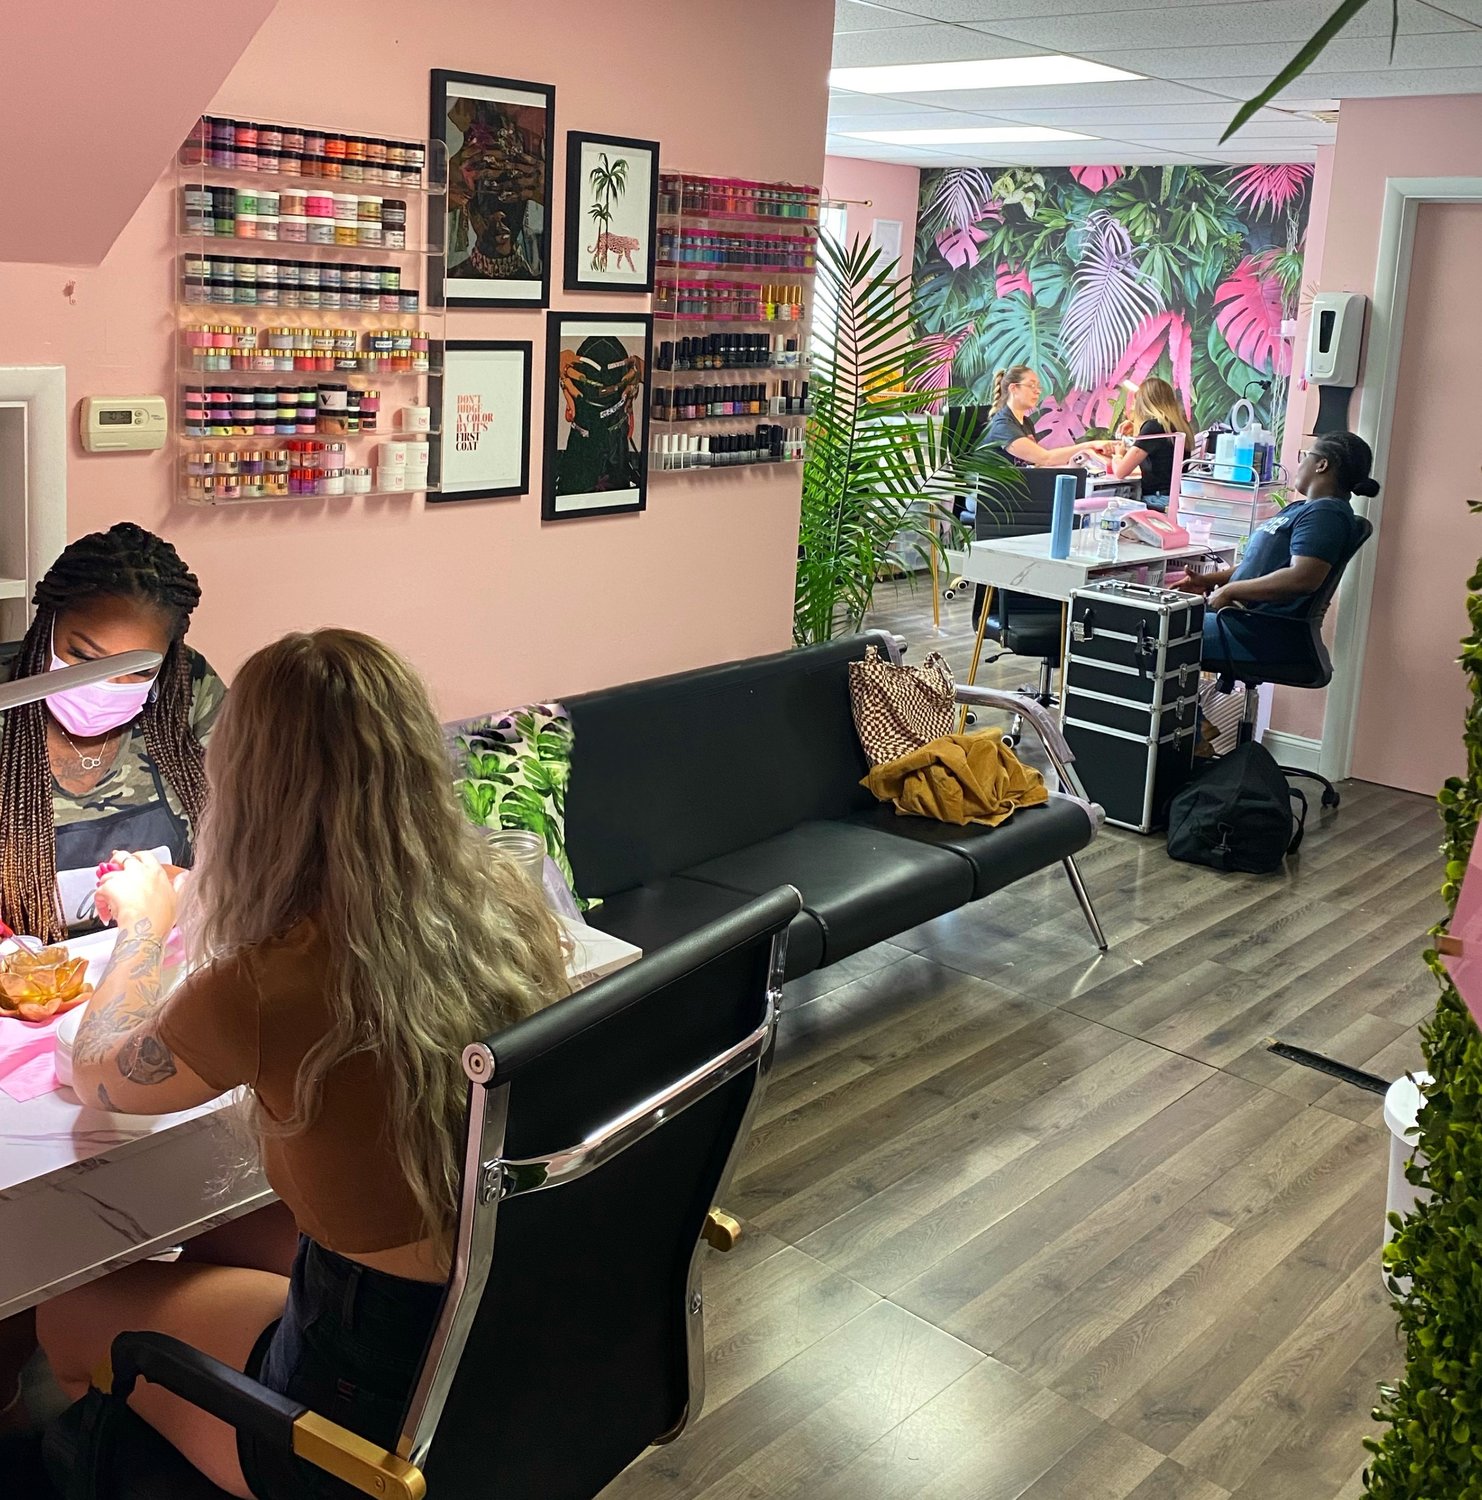 Apex Nails & Spa celebrates its grand opening Saturday (July 30) from 11 a.m.-7 p.m.